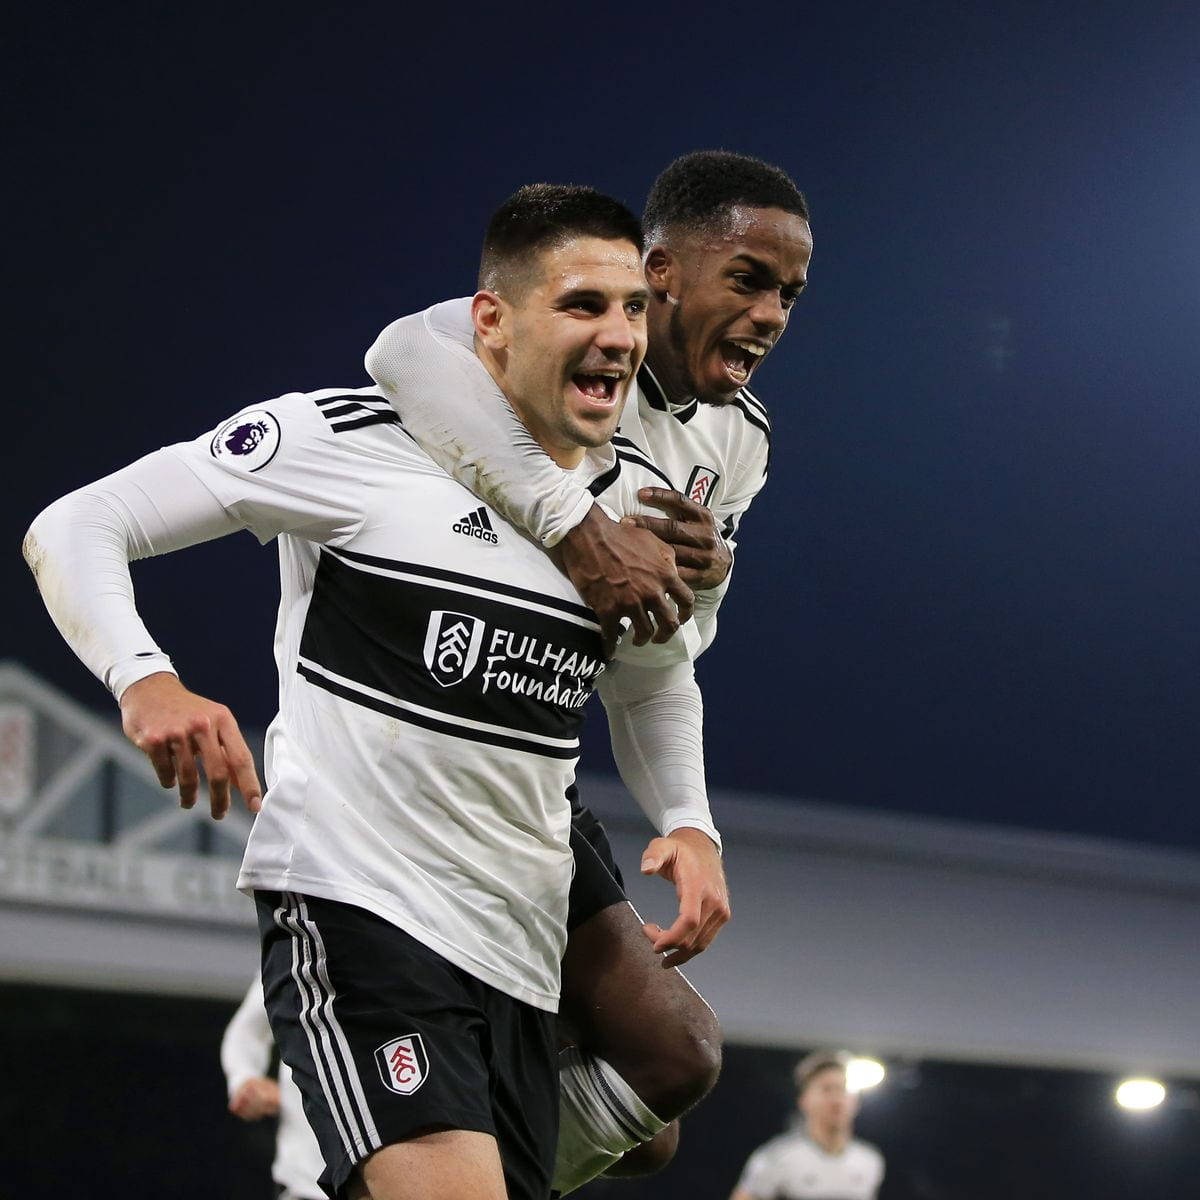 Fulham FC Player Carrying Wallpaper